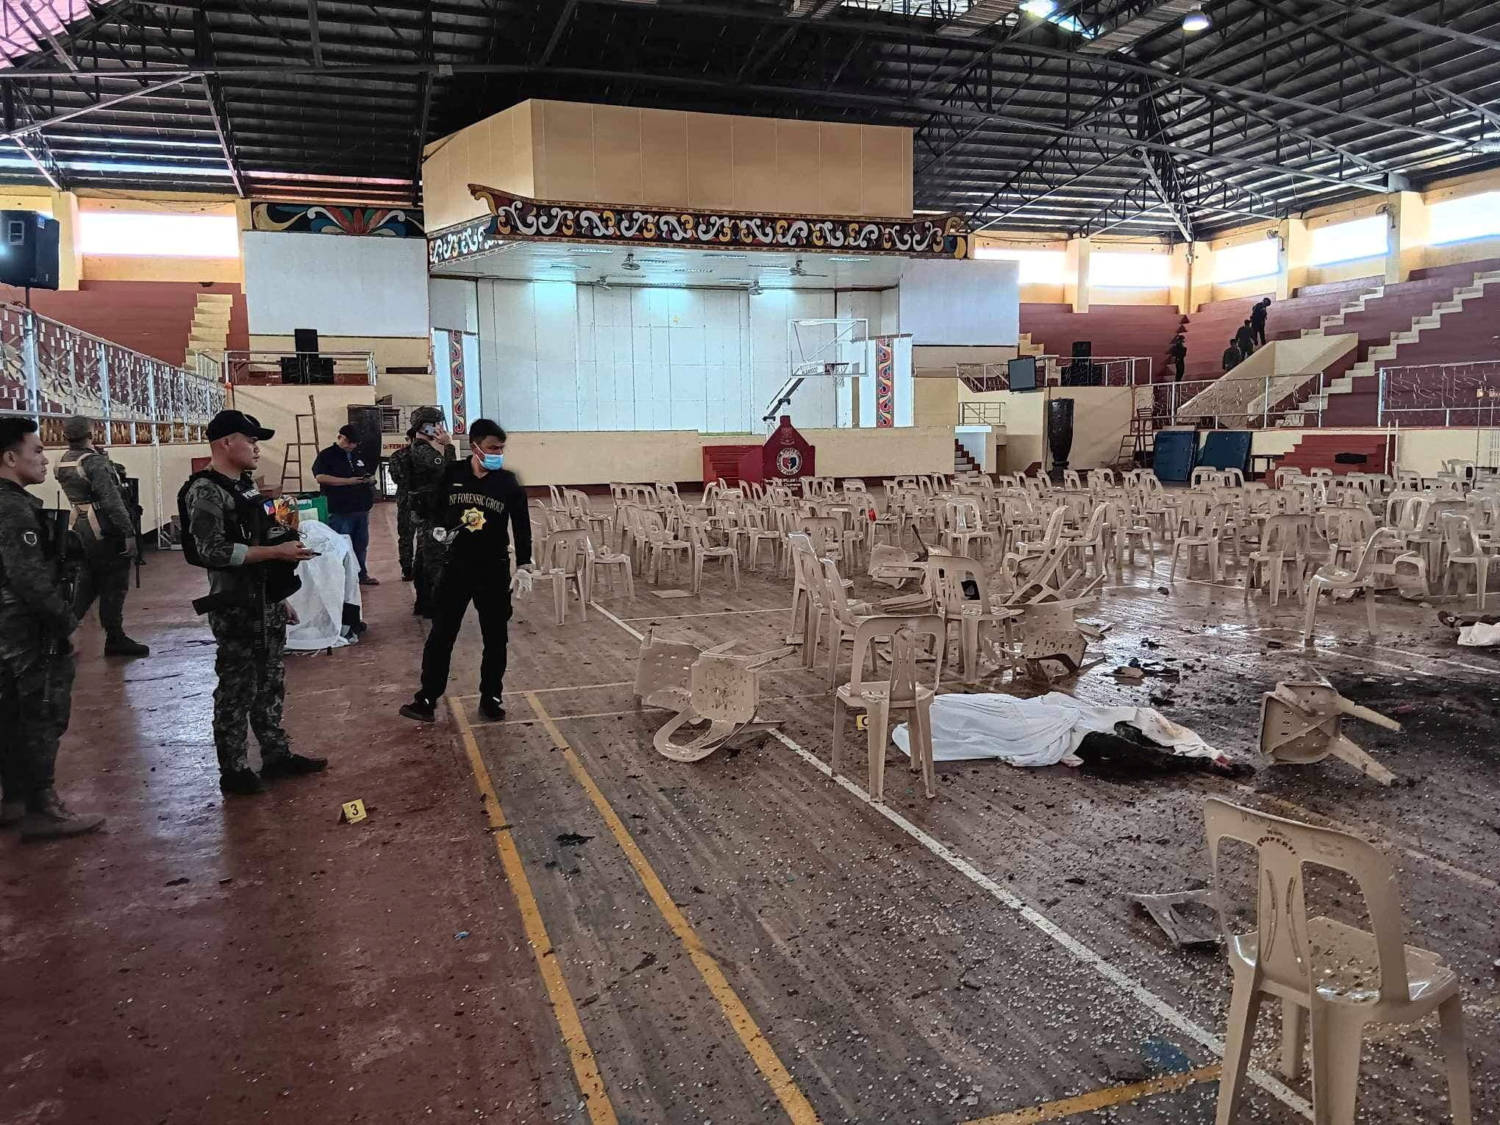 File Photo: Aftermath Of Explosion During A Catholic Mass At Mindanao State University In Marawi